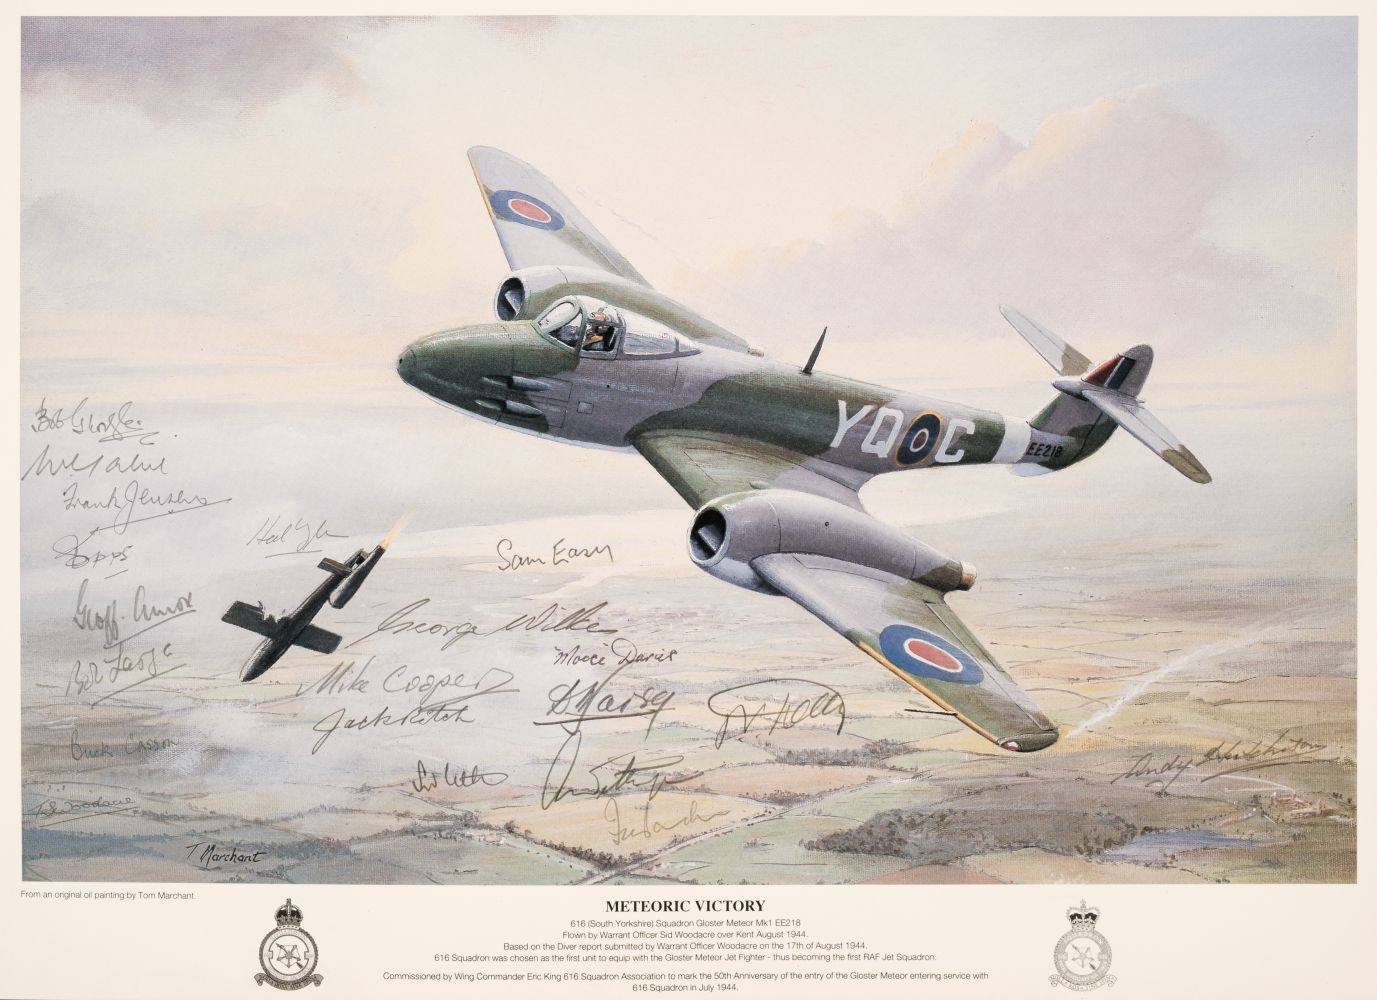 Marchant (Tom). Meteoric Victory, colour print, showing 616 Squadron Gloster Meteor